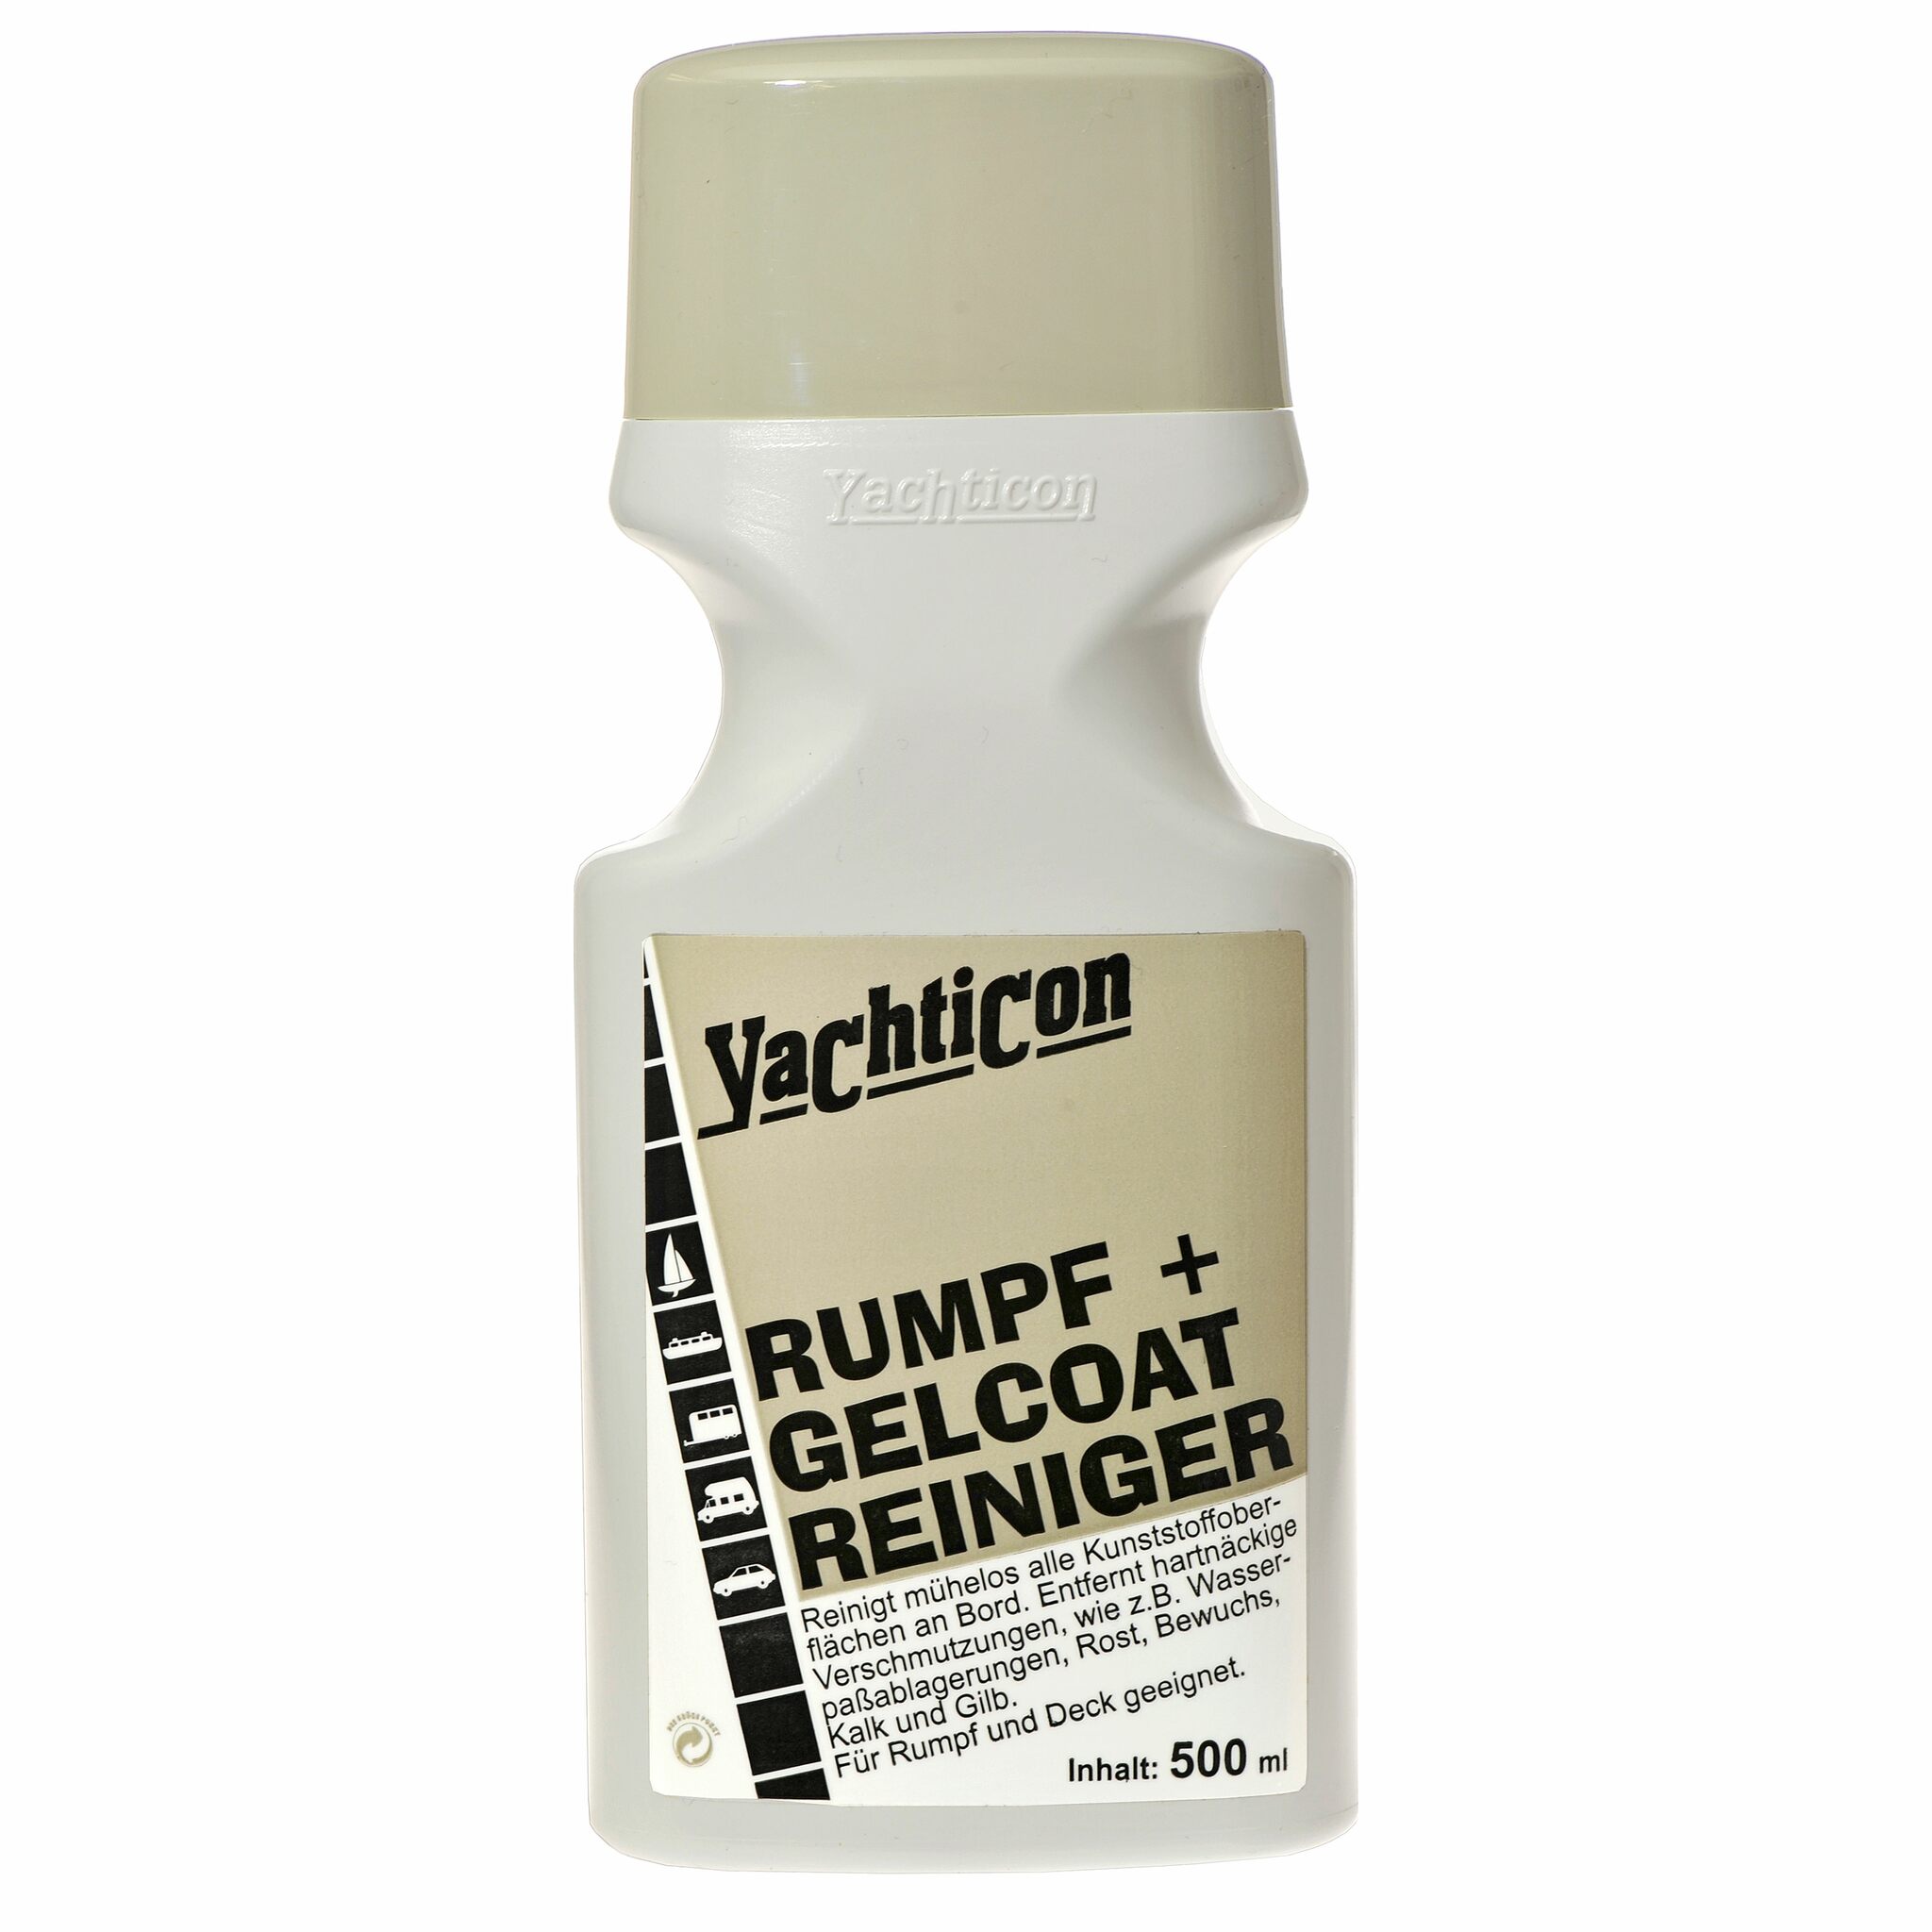 Yachticon Hull and Gelcoat Cleaner